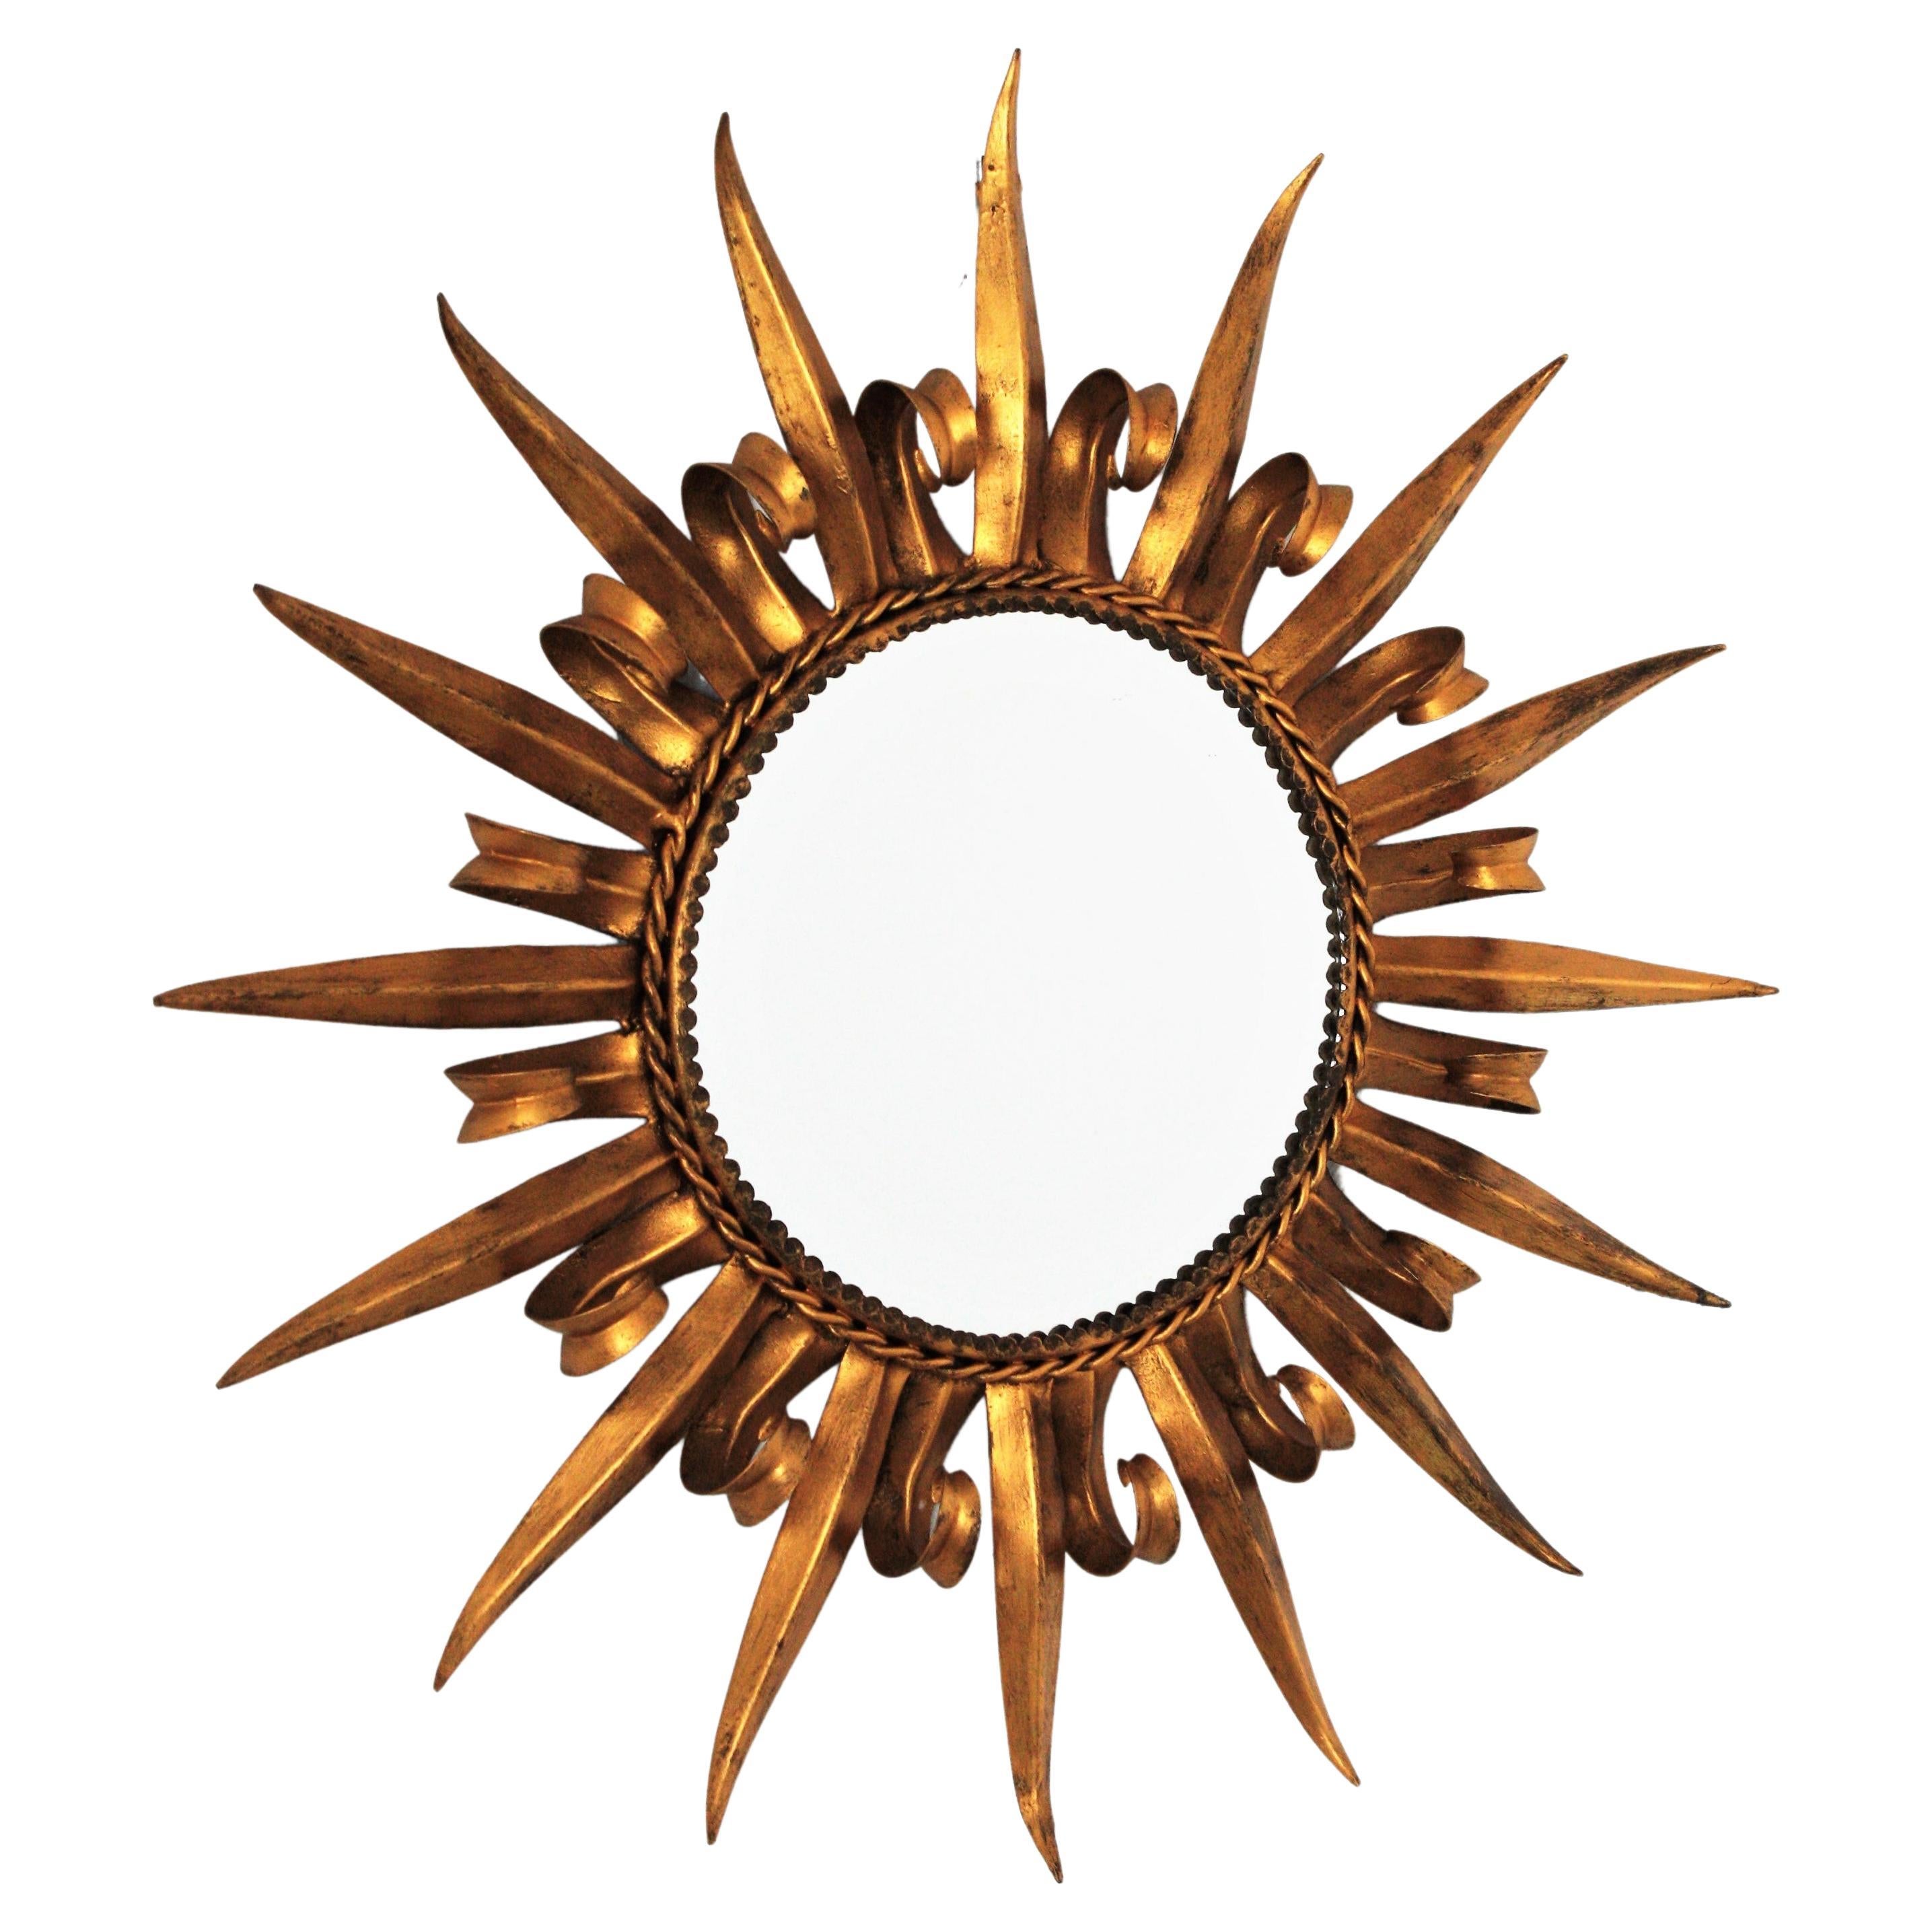 Gilt Metal French Sunburst Mirror Eyelash Design, 1950s
Lovely 1950s hand-hammered double layered eyelash gilt iron round sunburst mirror.
The frame is made by alternating curved beams in eyelash shape and straight rays. It has a nice bronze-gilt